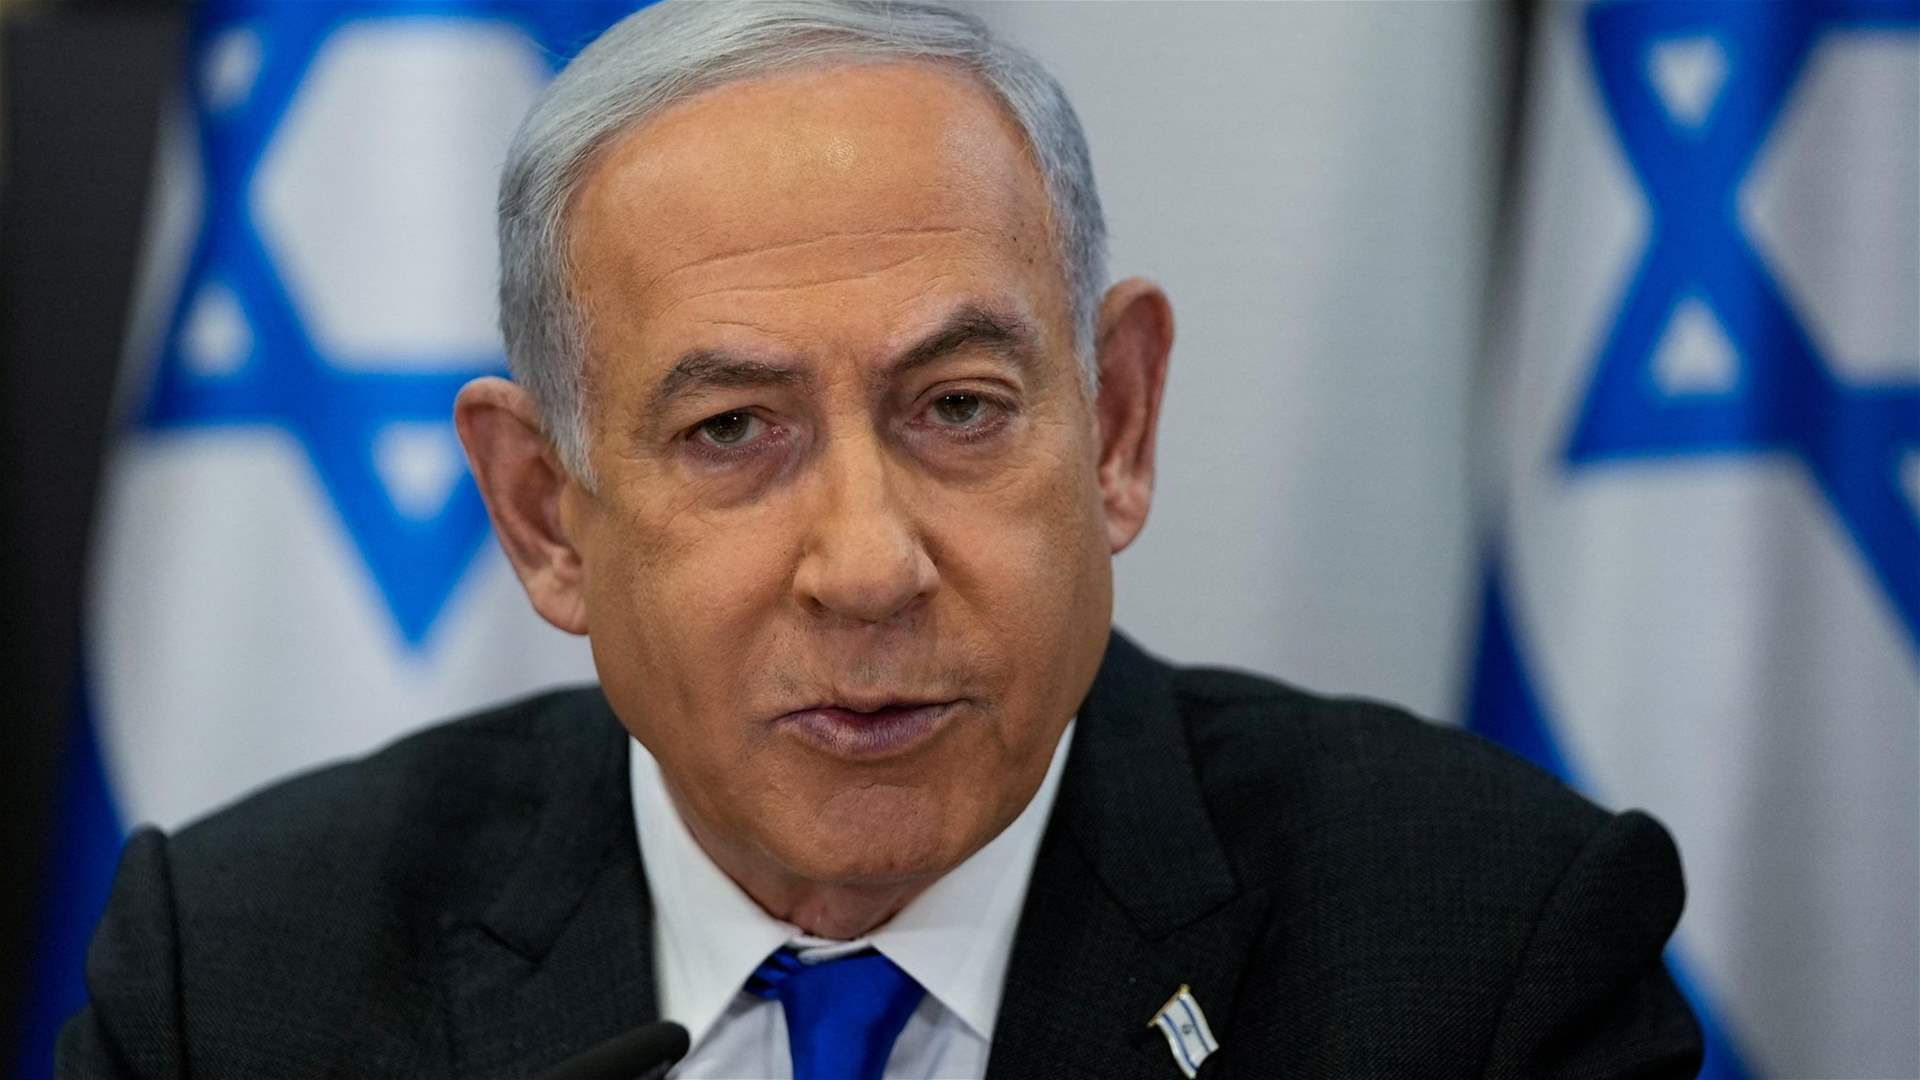 Netanyahu firmly rejects &#39;unilateral imposition of Palestinian state&#39;